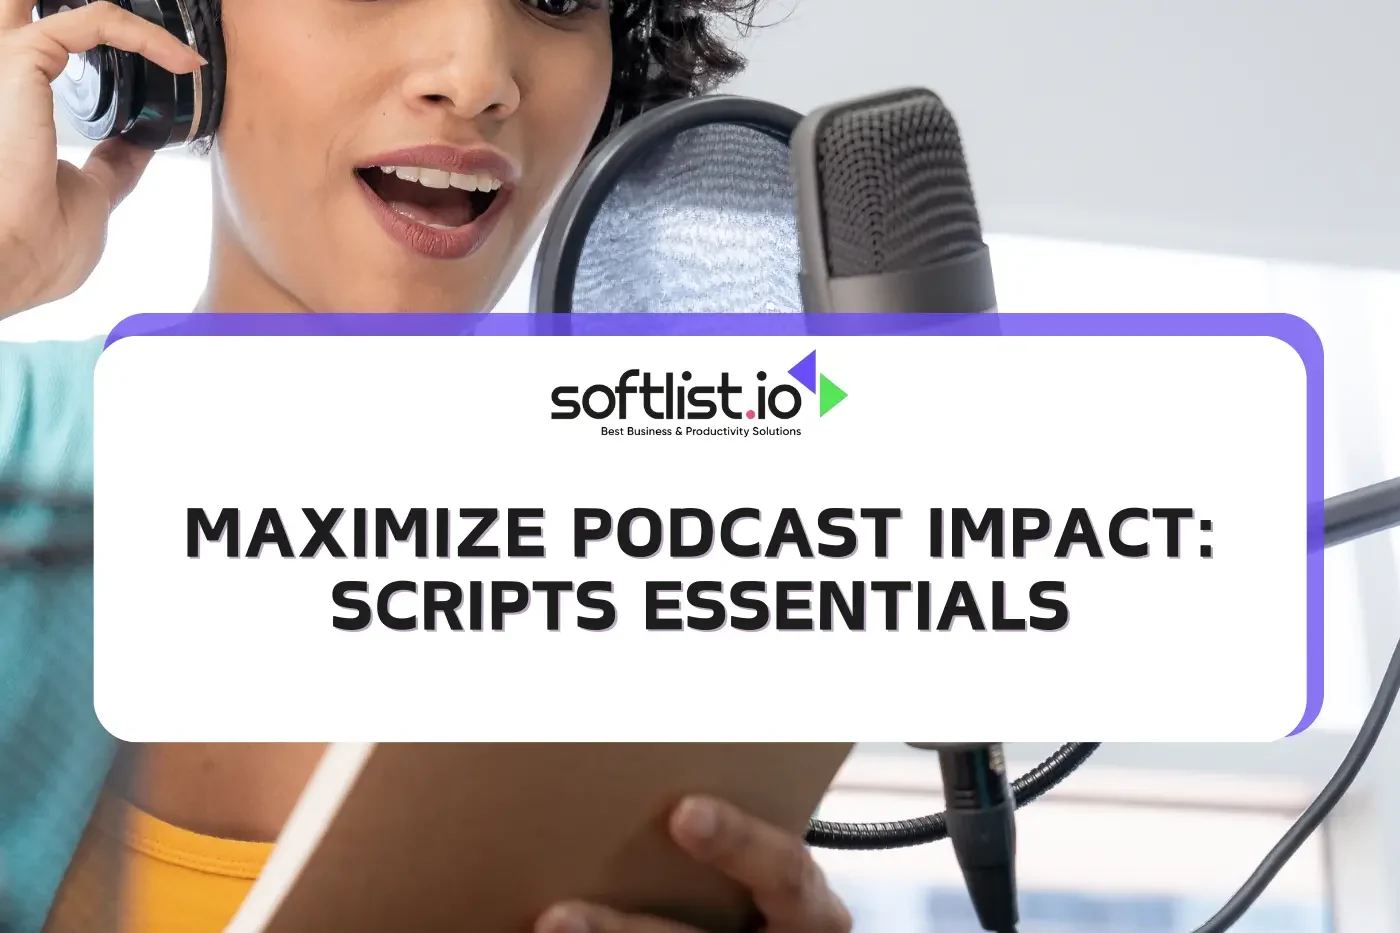 Understanding the Benefits of Podcasting Scripts